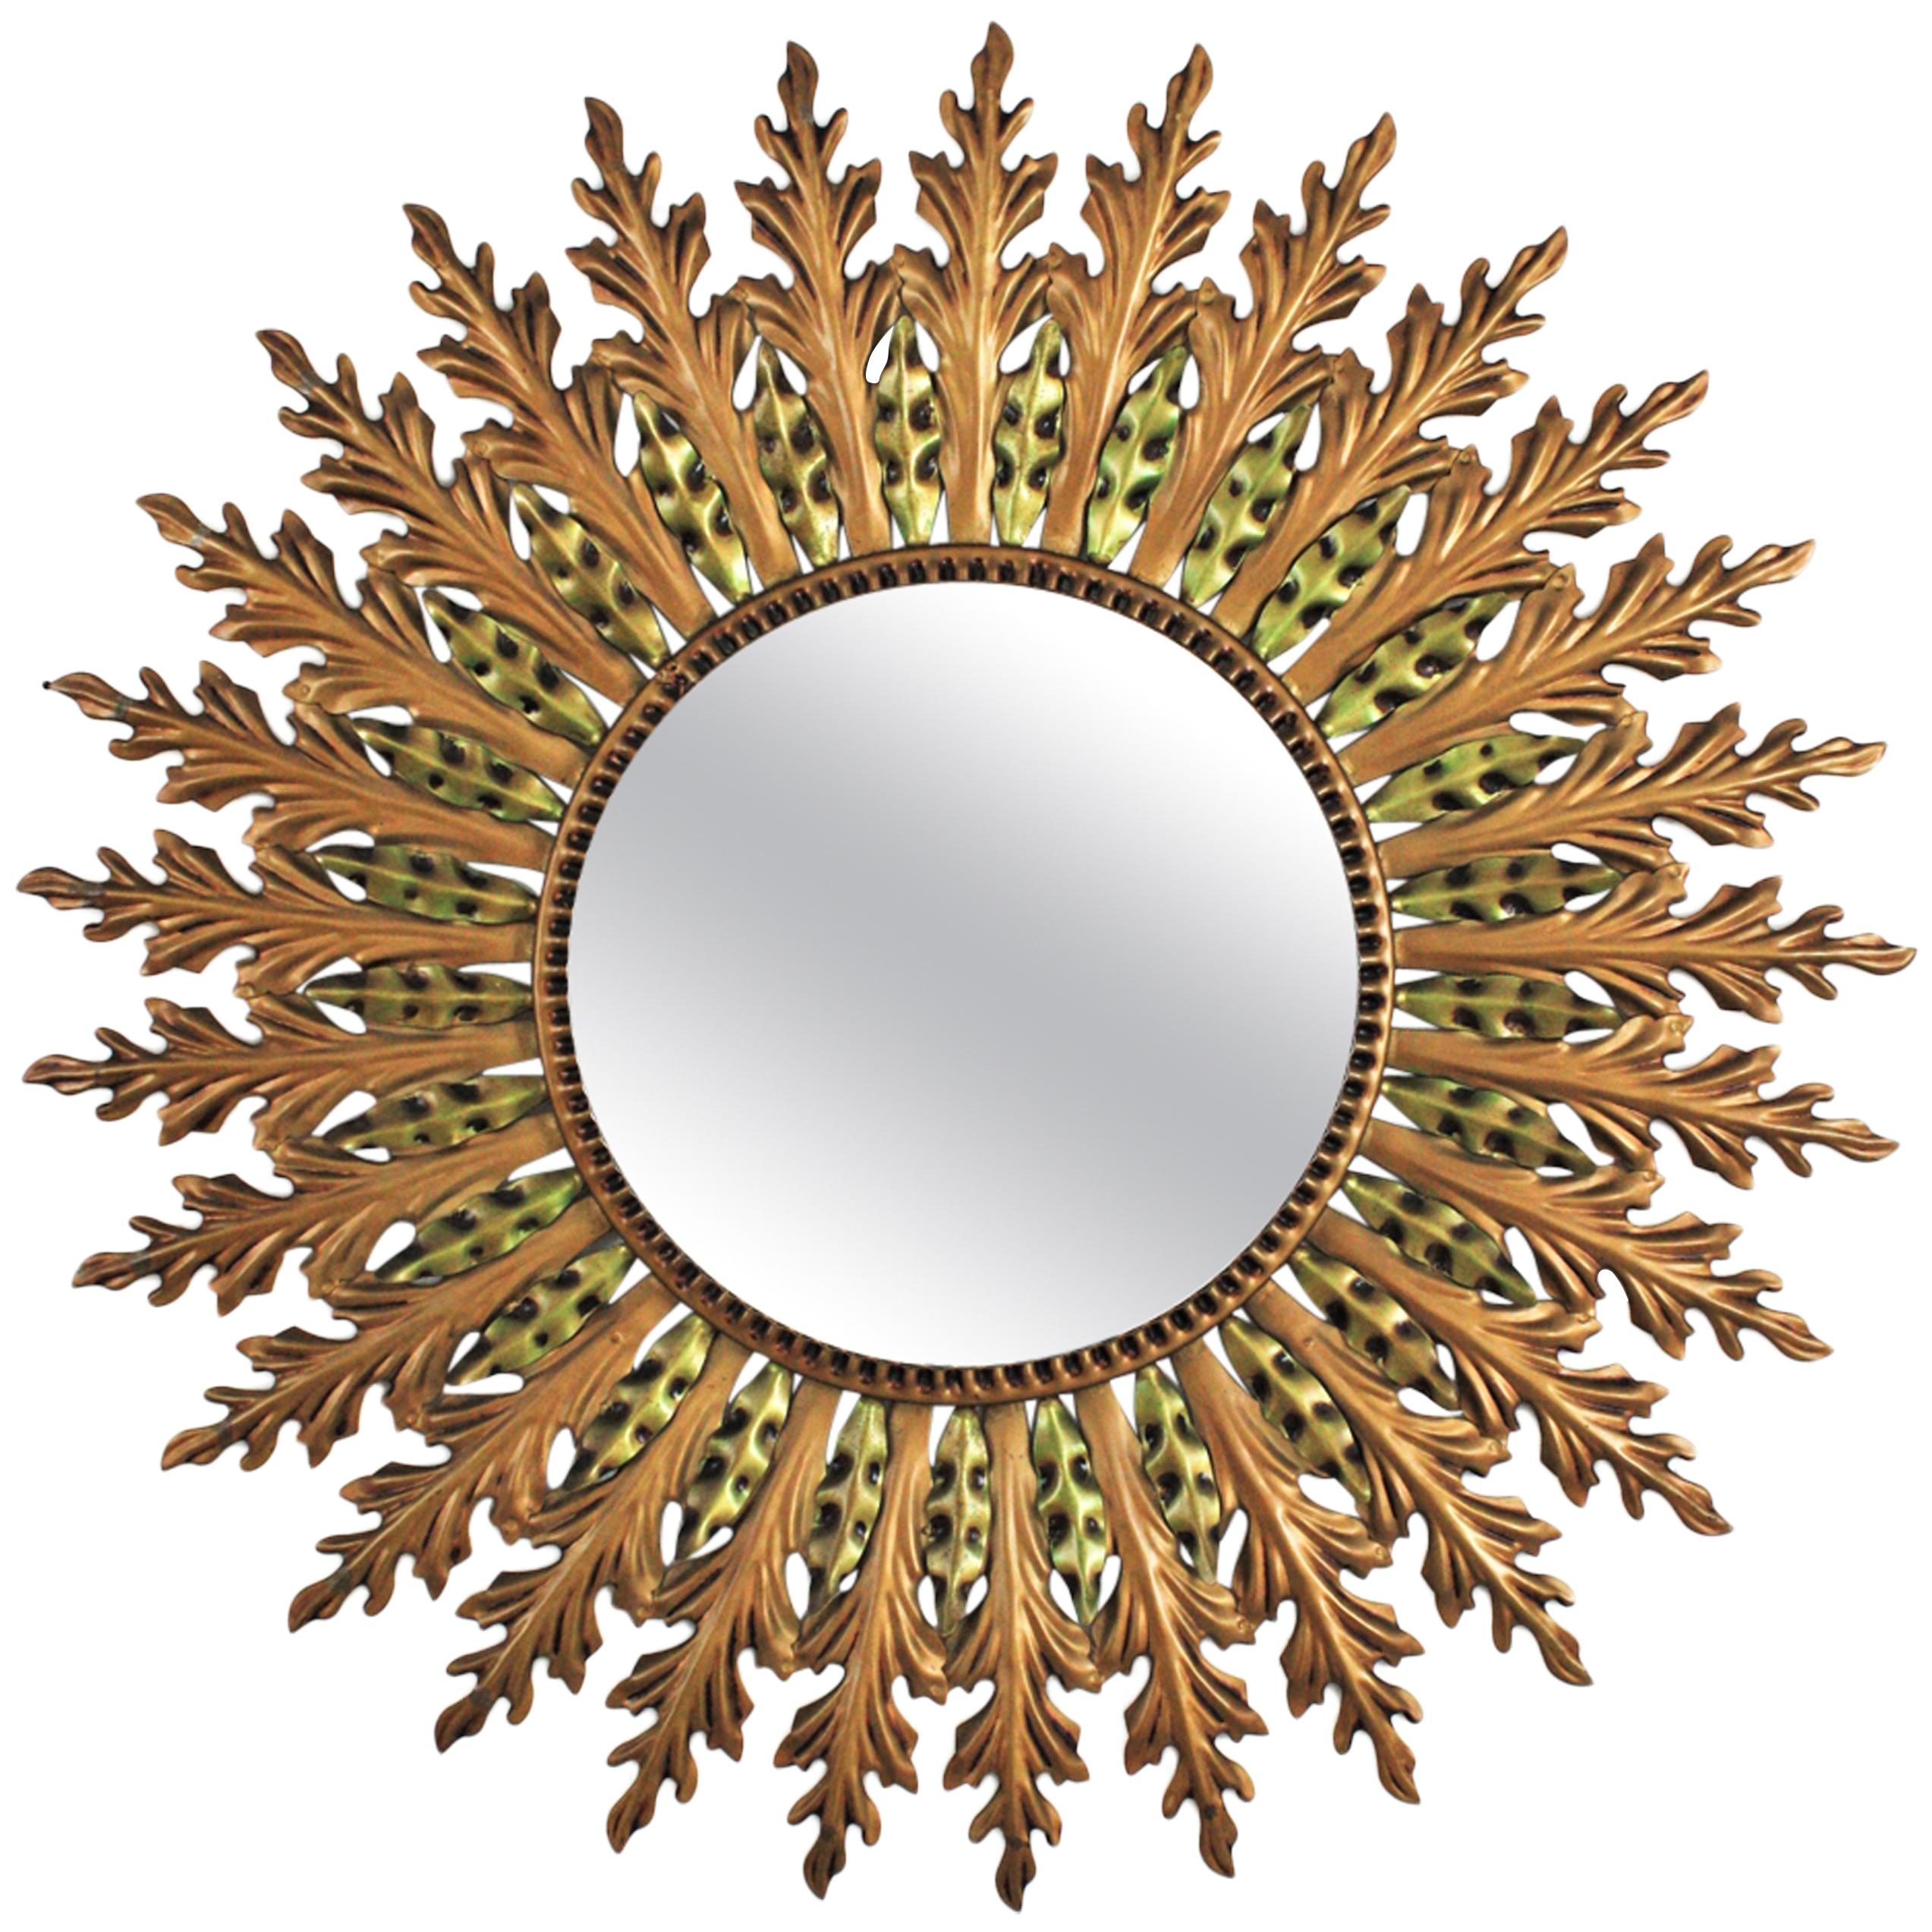 Sunburst Mirror in Gilt Metal with Green Accents,  1960s For Sale